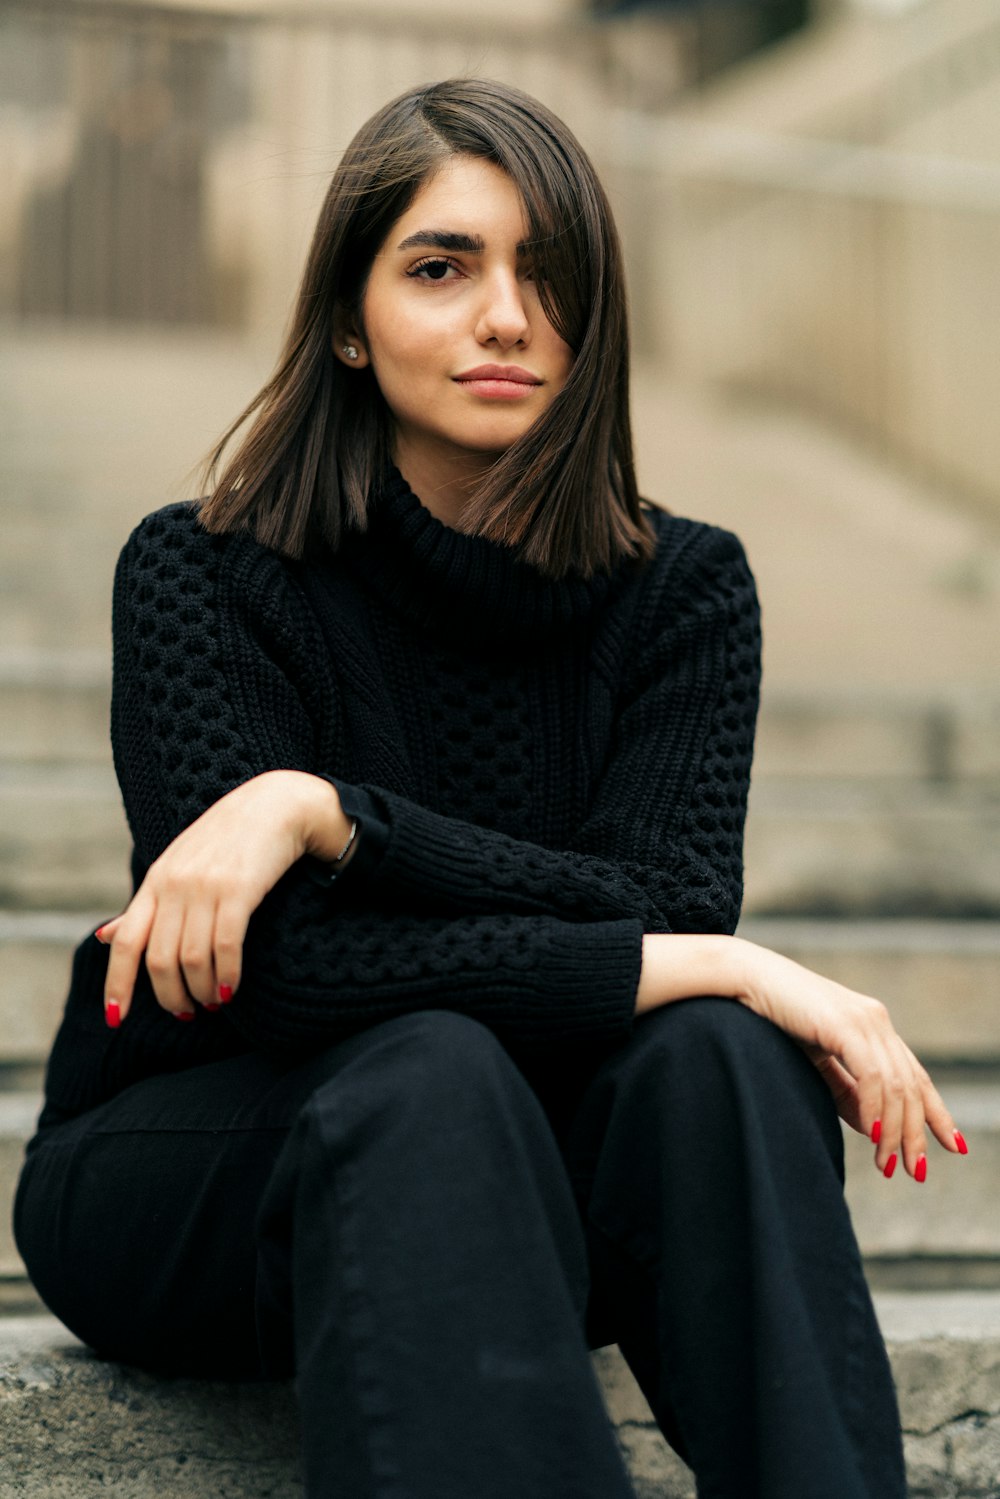 a woman sitting on steps wearing a black sweater and black pants